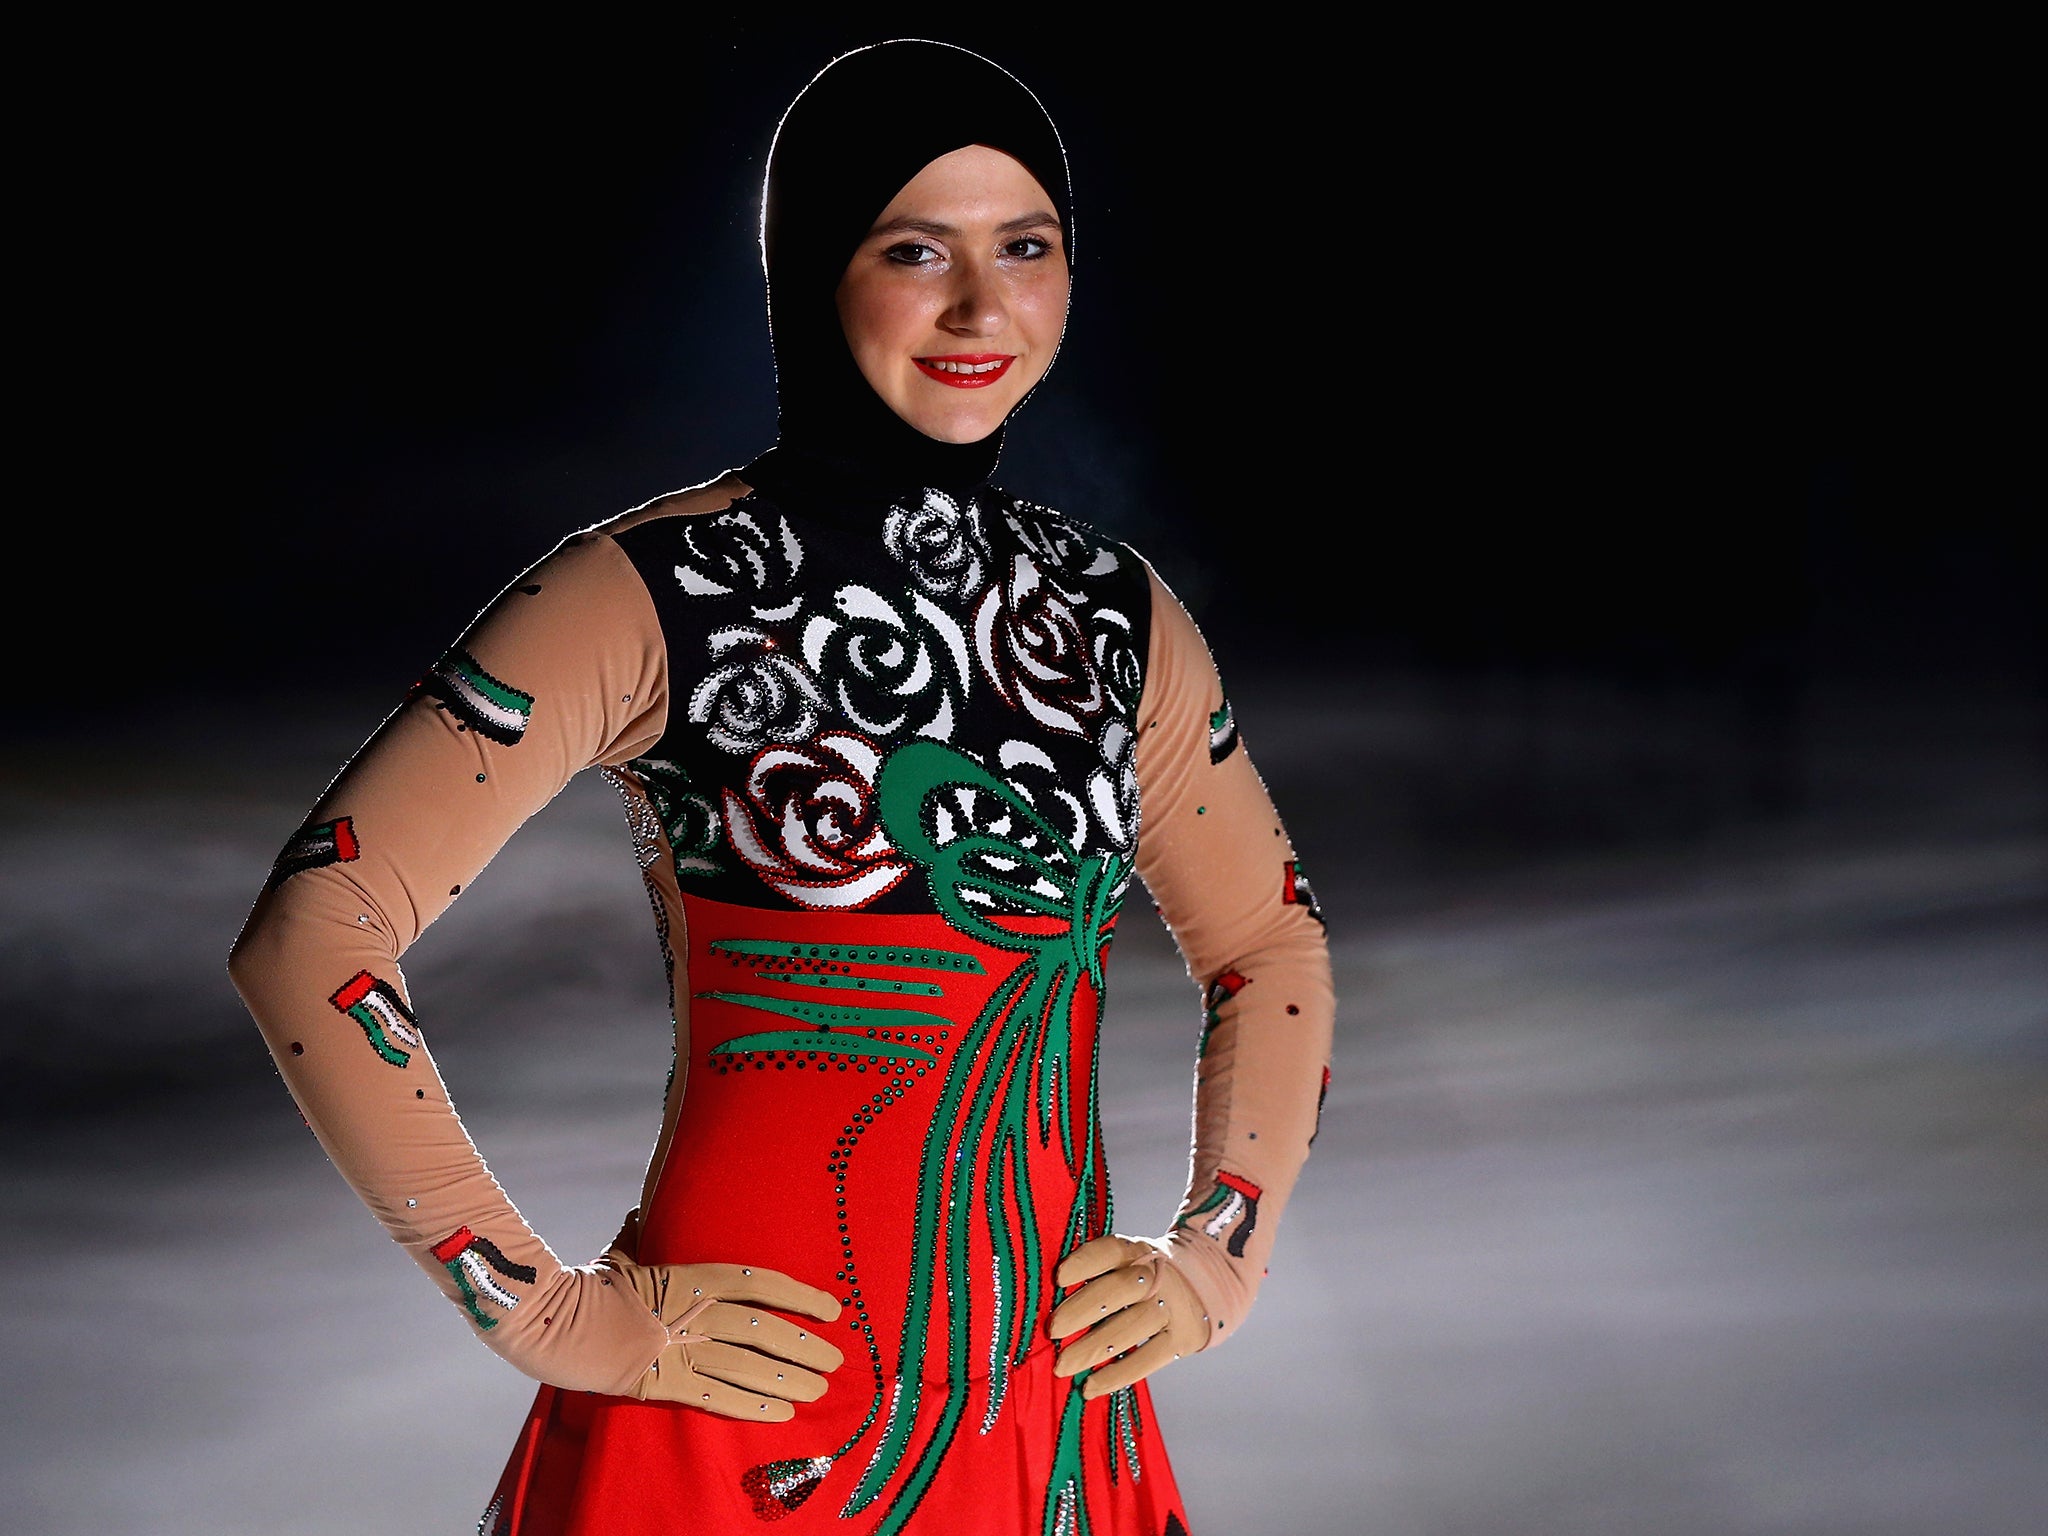 Despite growing up in a conservative Muslim country, Lari has found a way to compete while maintaining traditions